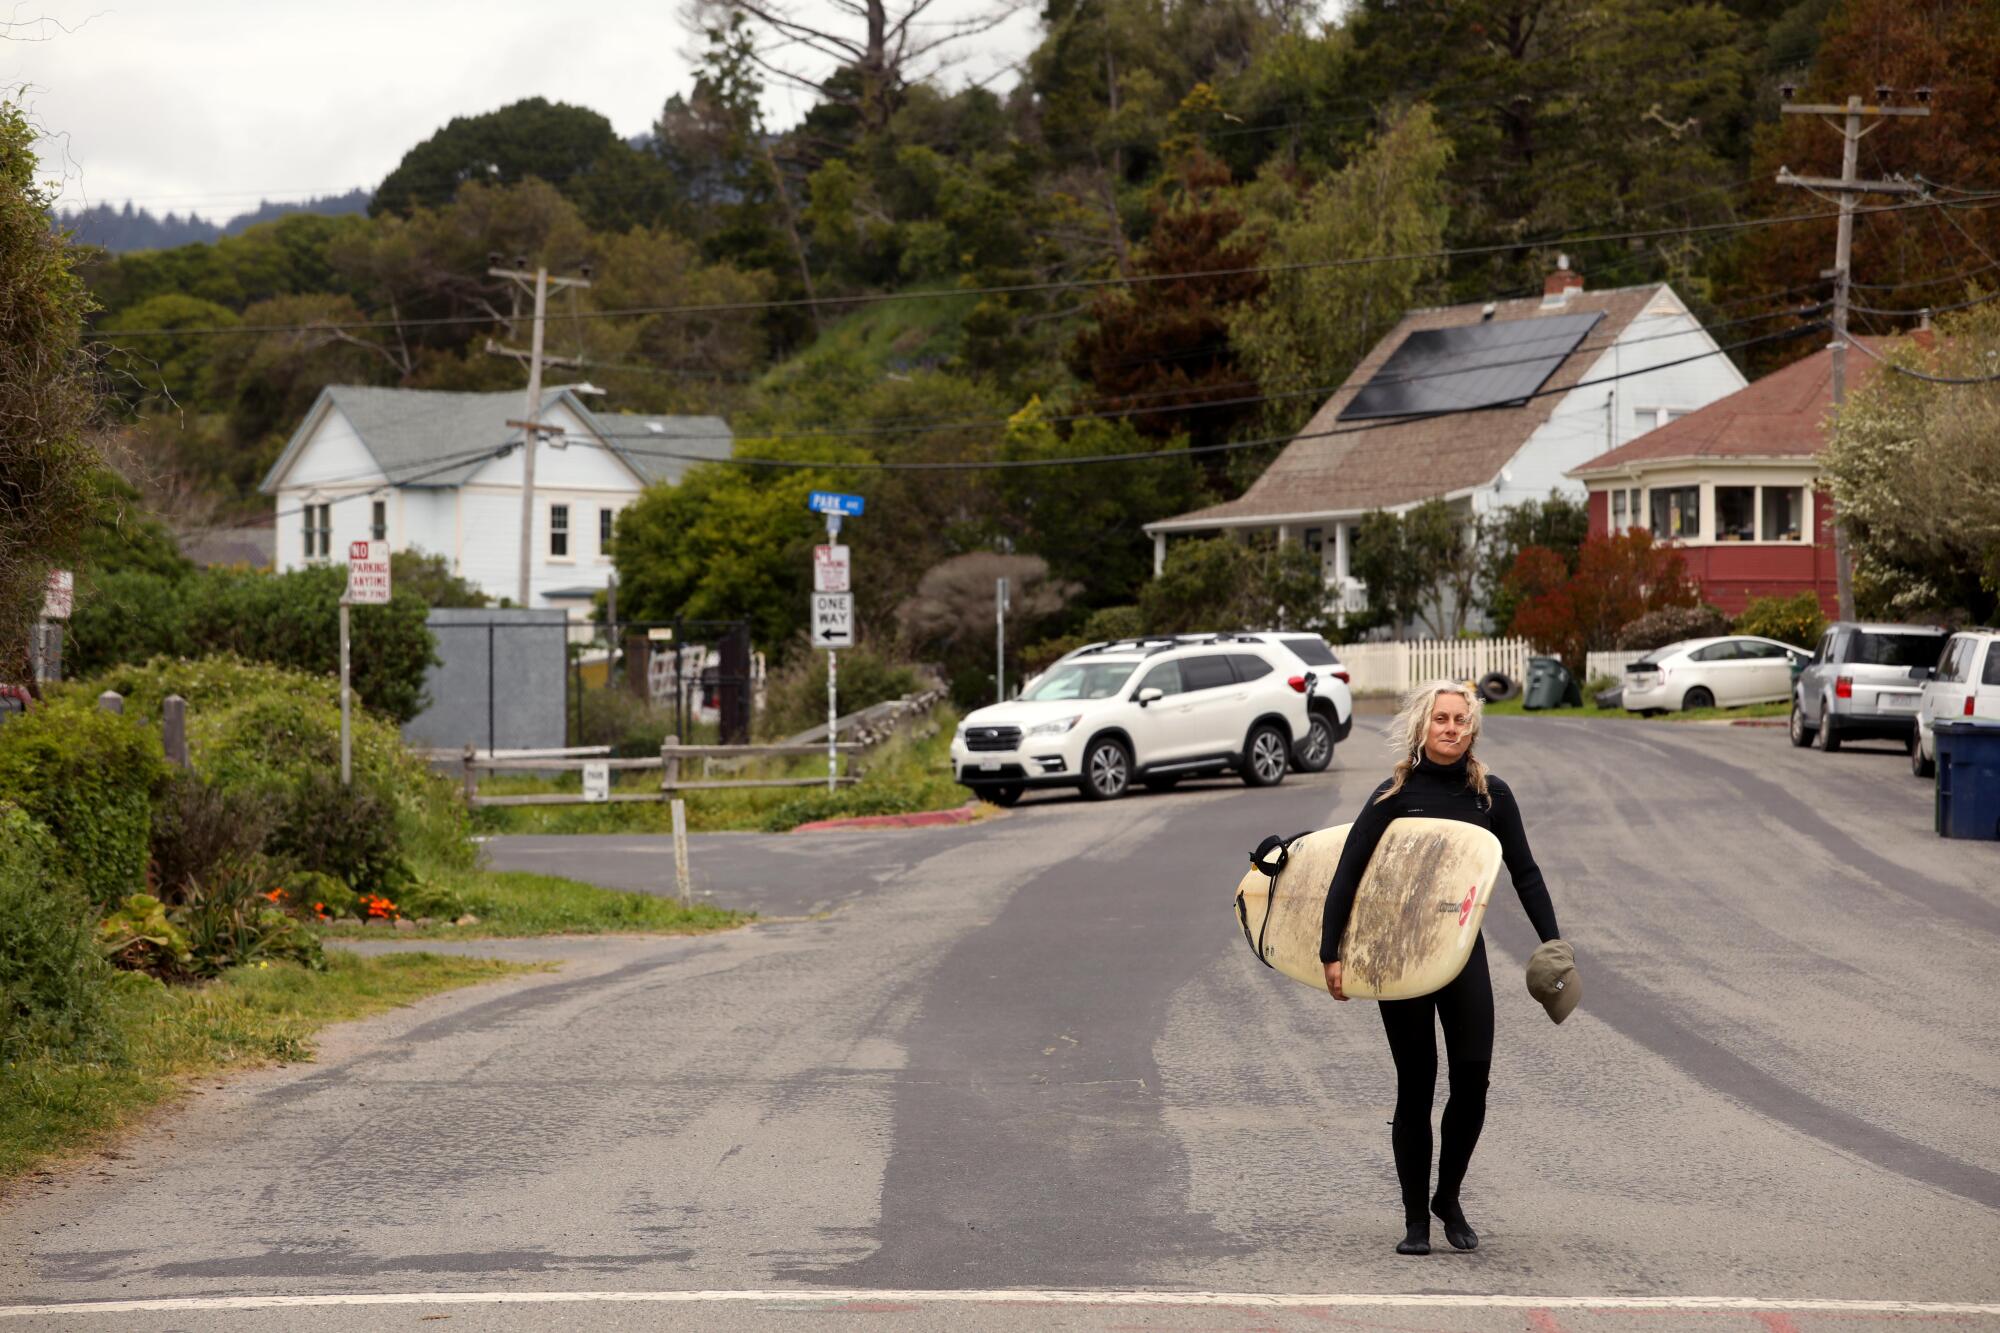 A woman in a black wetsuit carries her surfboard down an empty street.